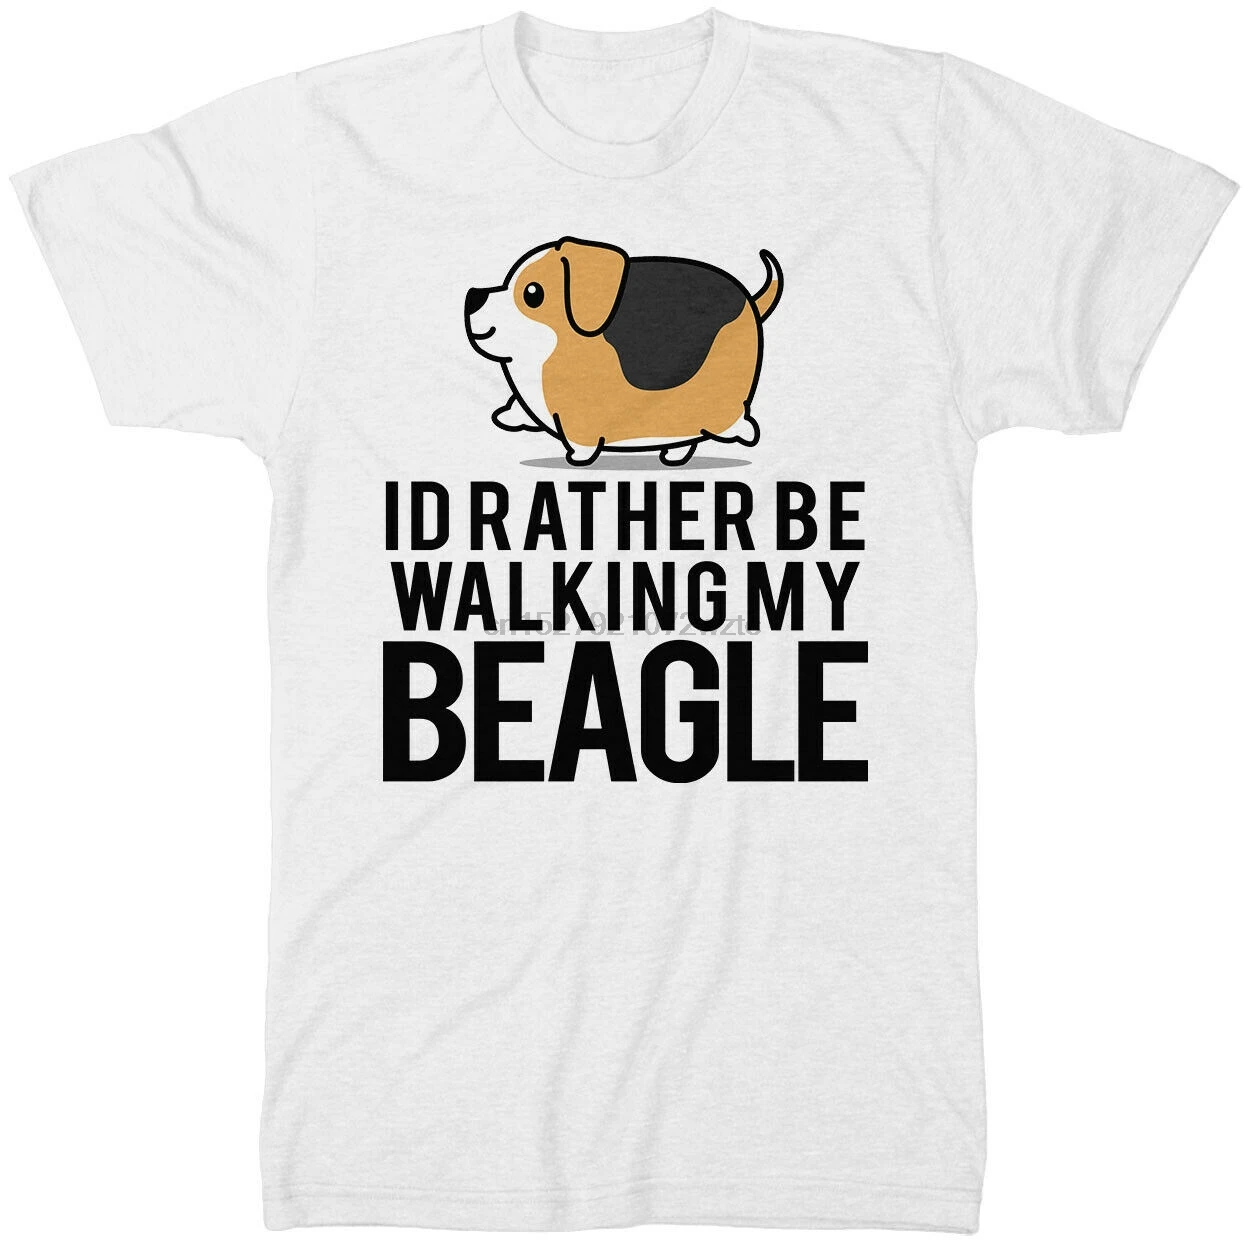 Id Rather Be Walking My Beagle T Shirt Funny Joke Gift Idea For Any Dog  Owner - T-shirts - AliExpress